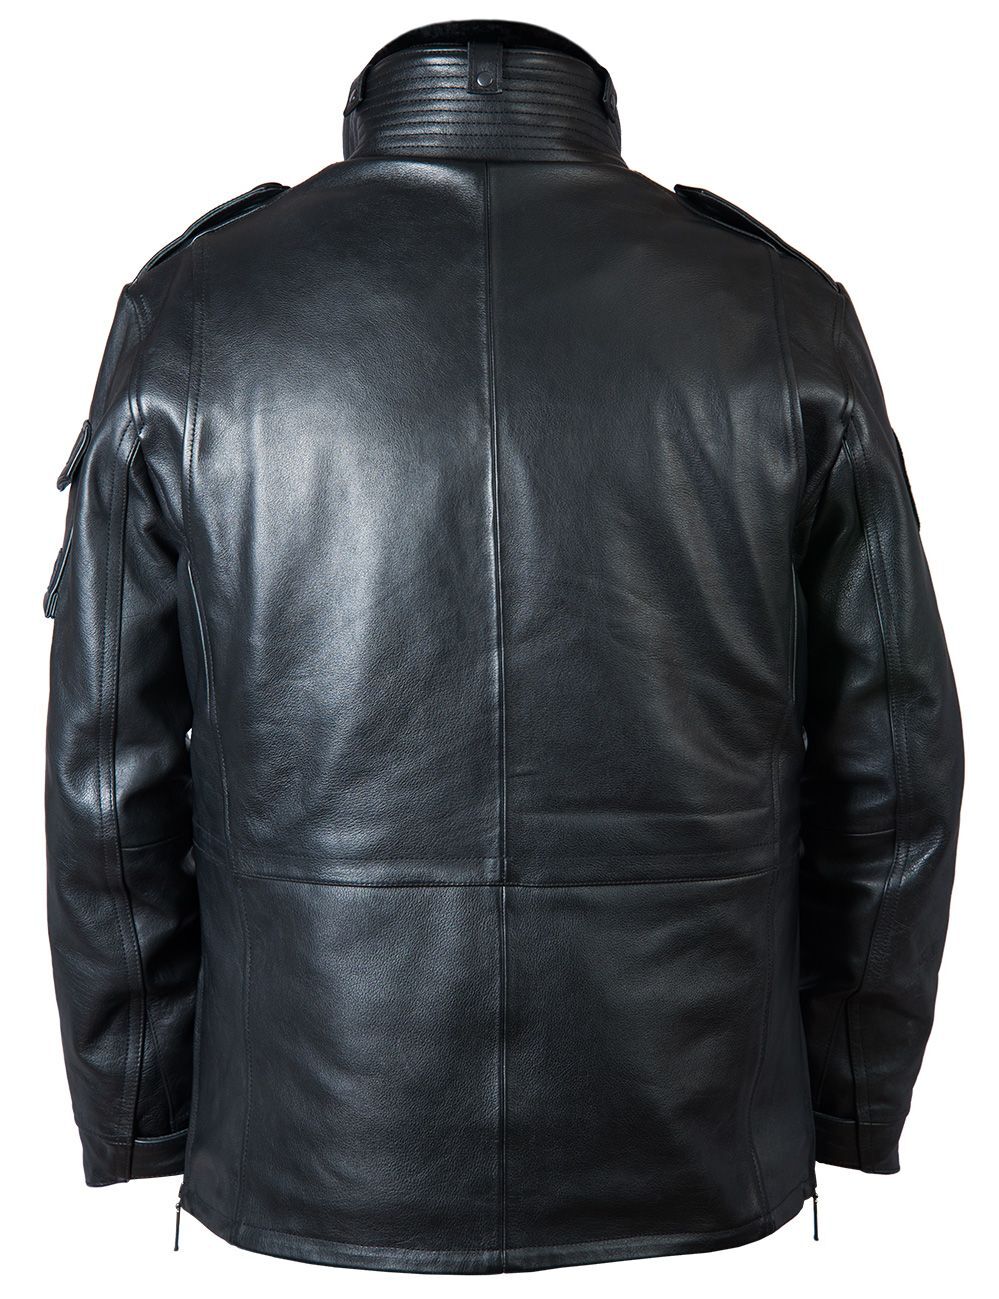 М65 SNIPER LEATHER JACKET WITH LINER BLACK